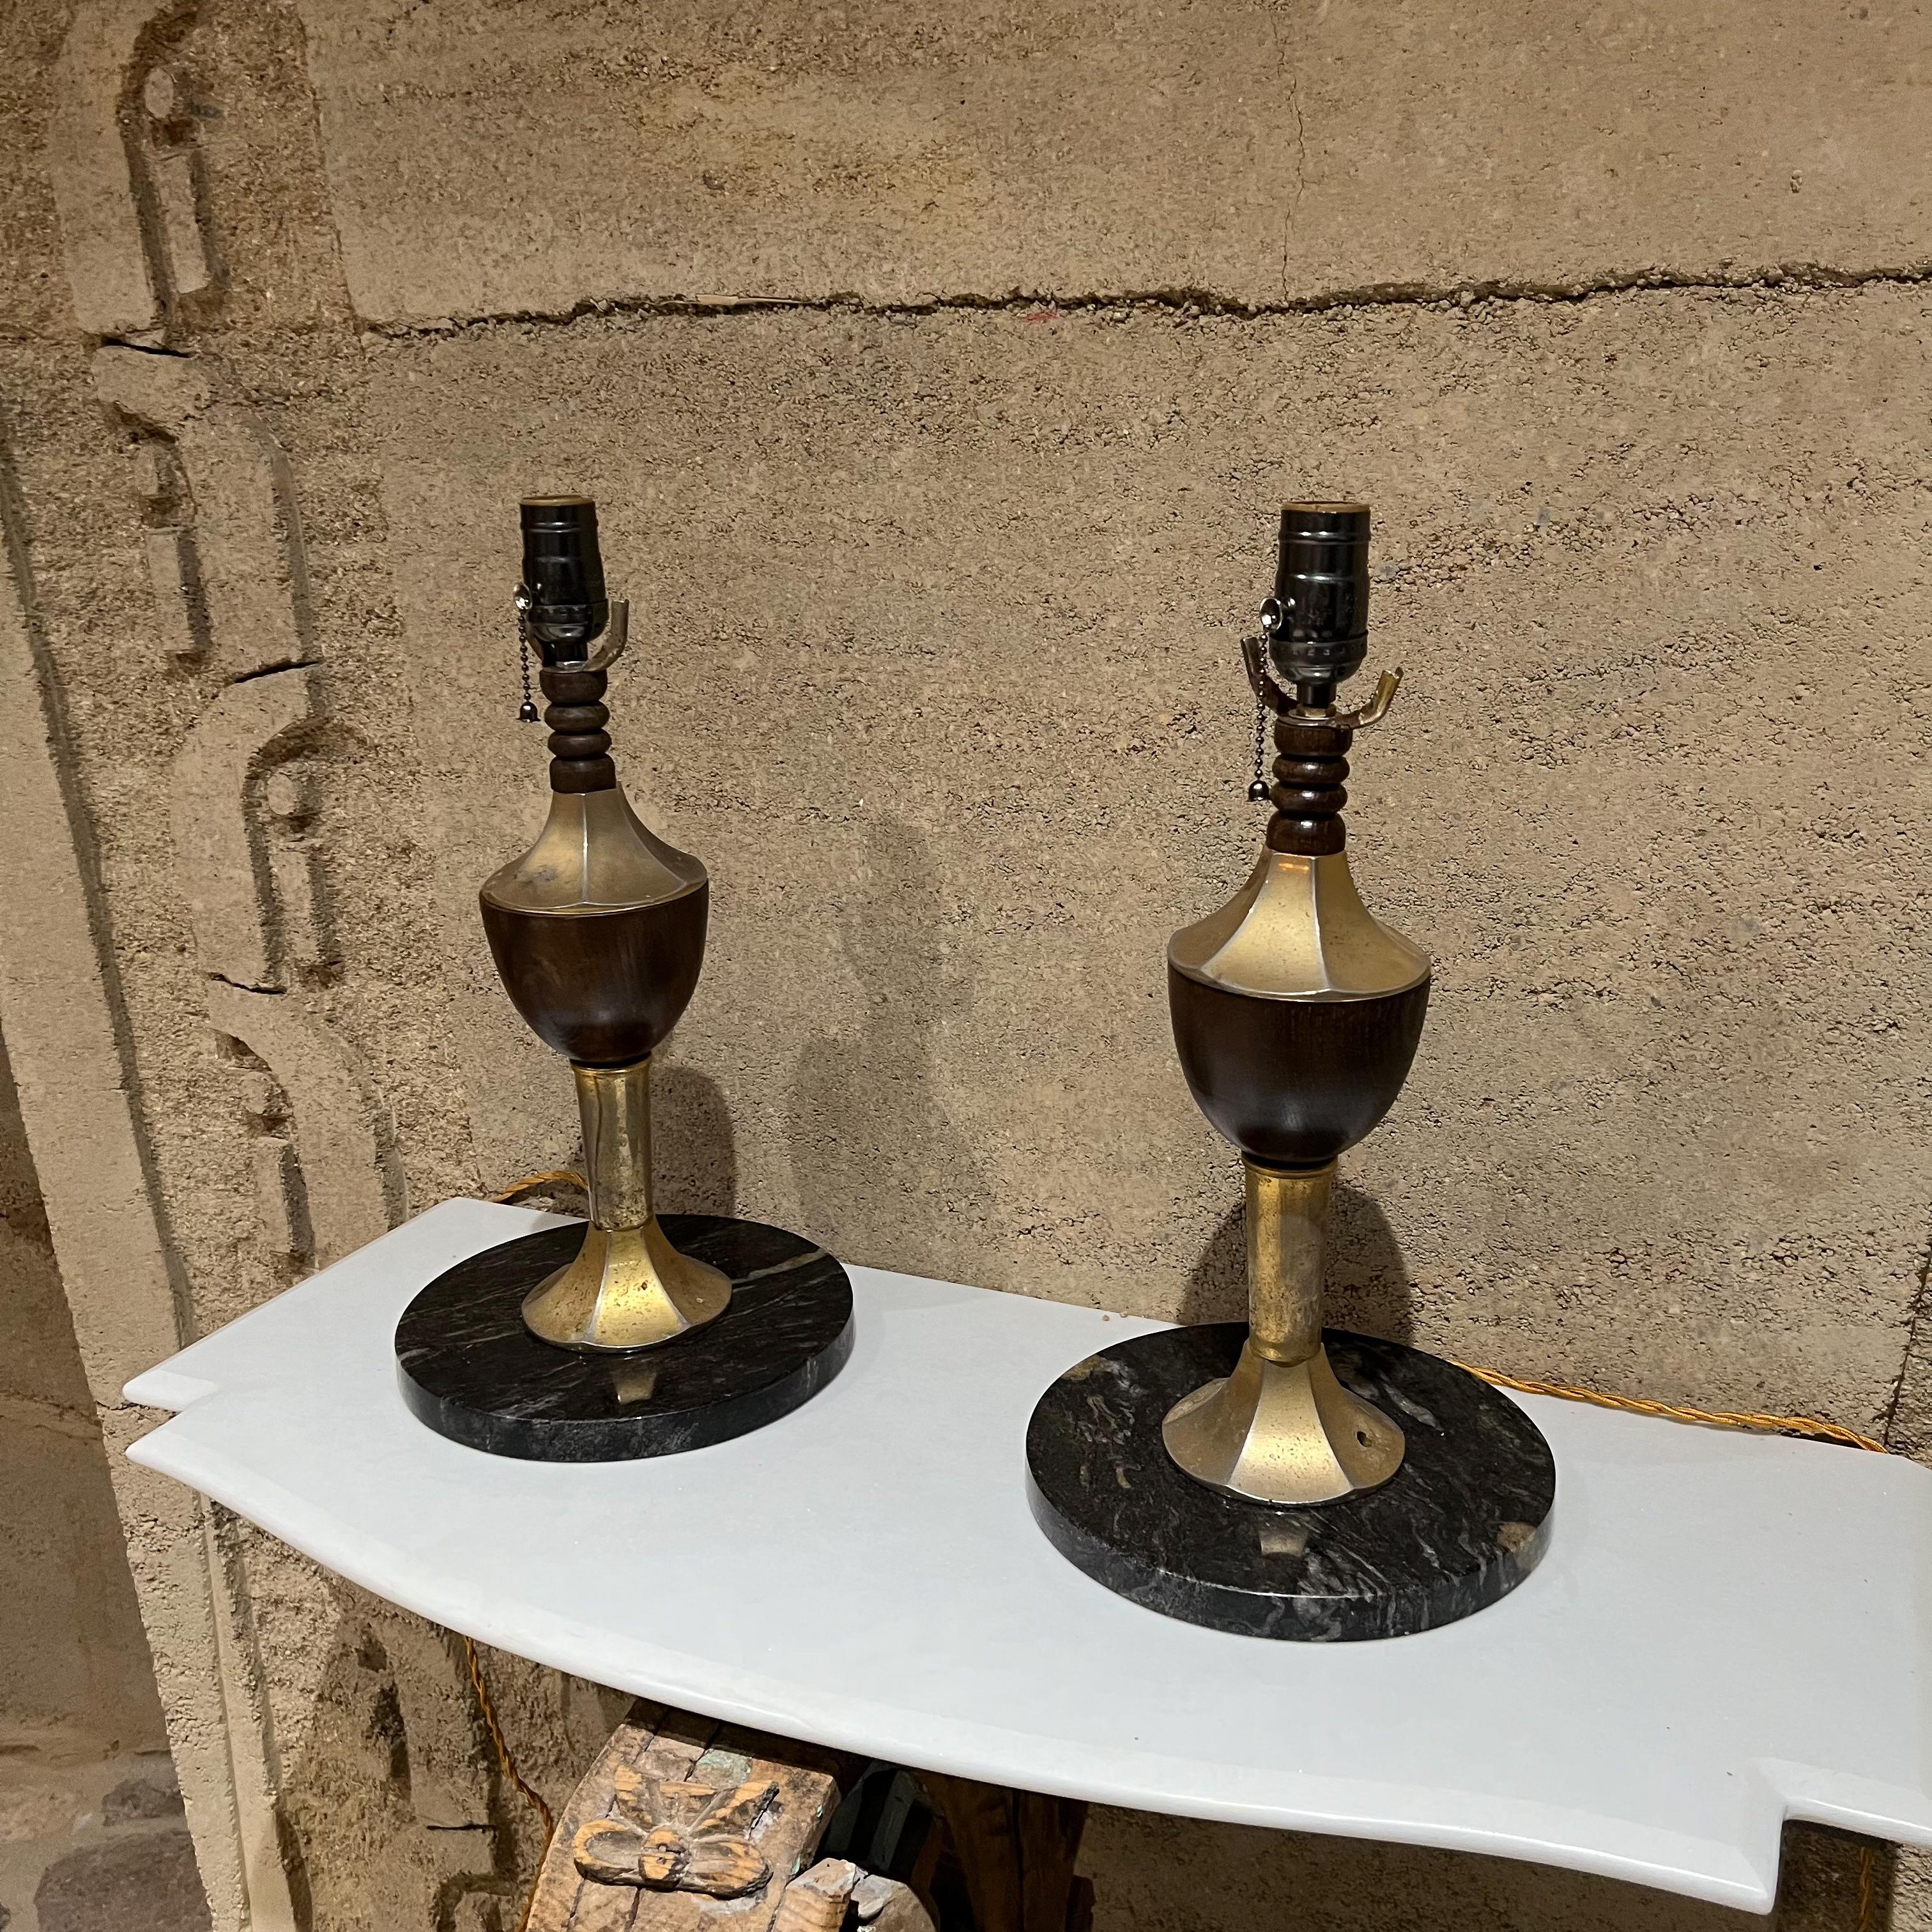 Table lamps Mexican Modernism
1960s Striking table lamp pair Modern black and gold goblet on round marble base
Unmarked
Style of Roberto and Mito Block
Measures: 16 tall to socket x 8.5 in diameter
Original preowned unrestored vintage